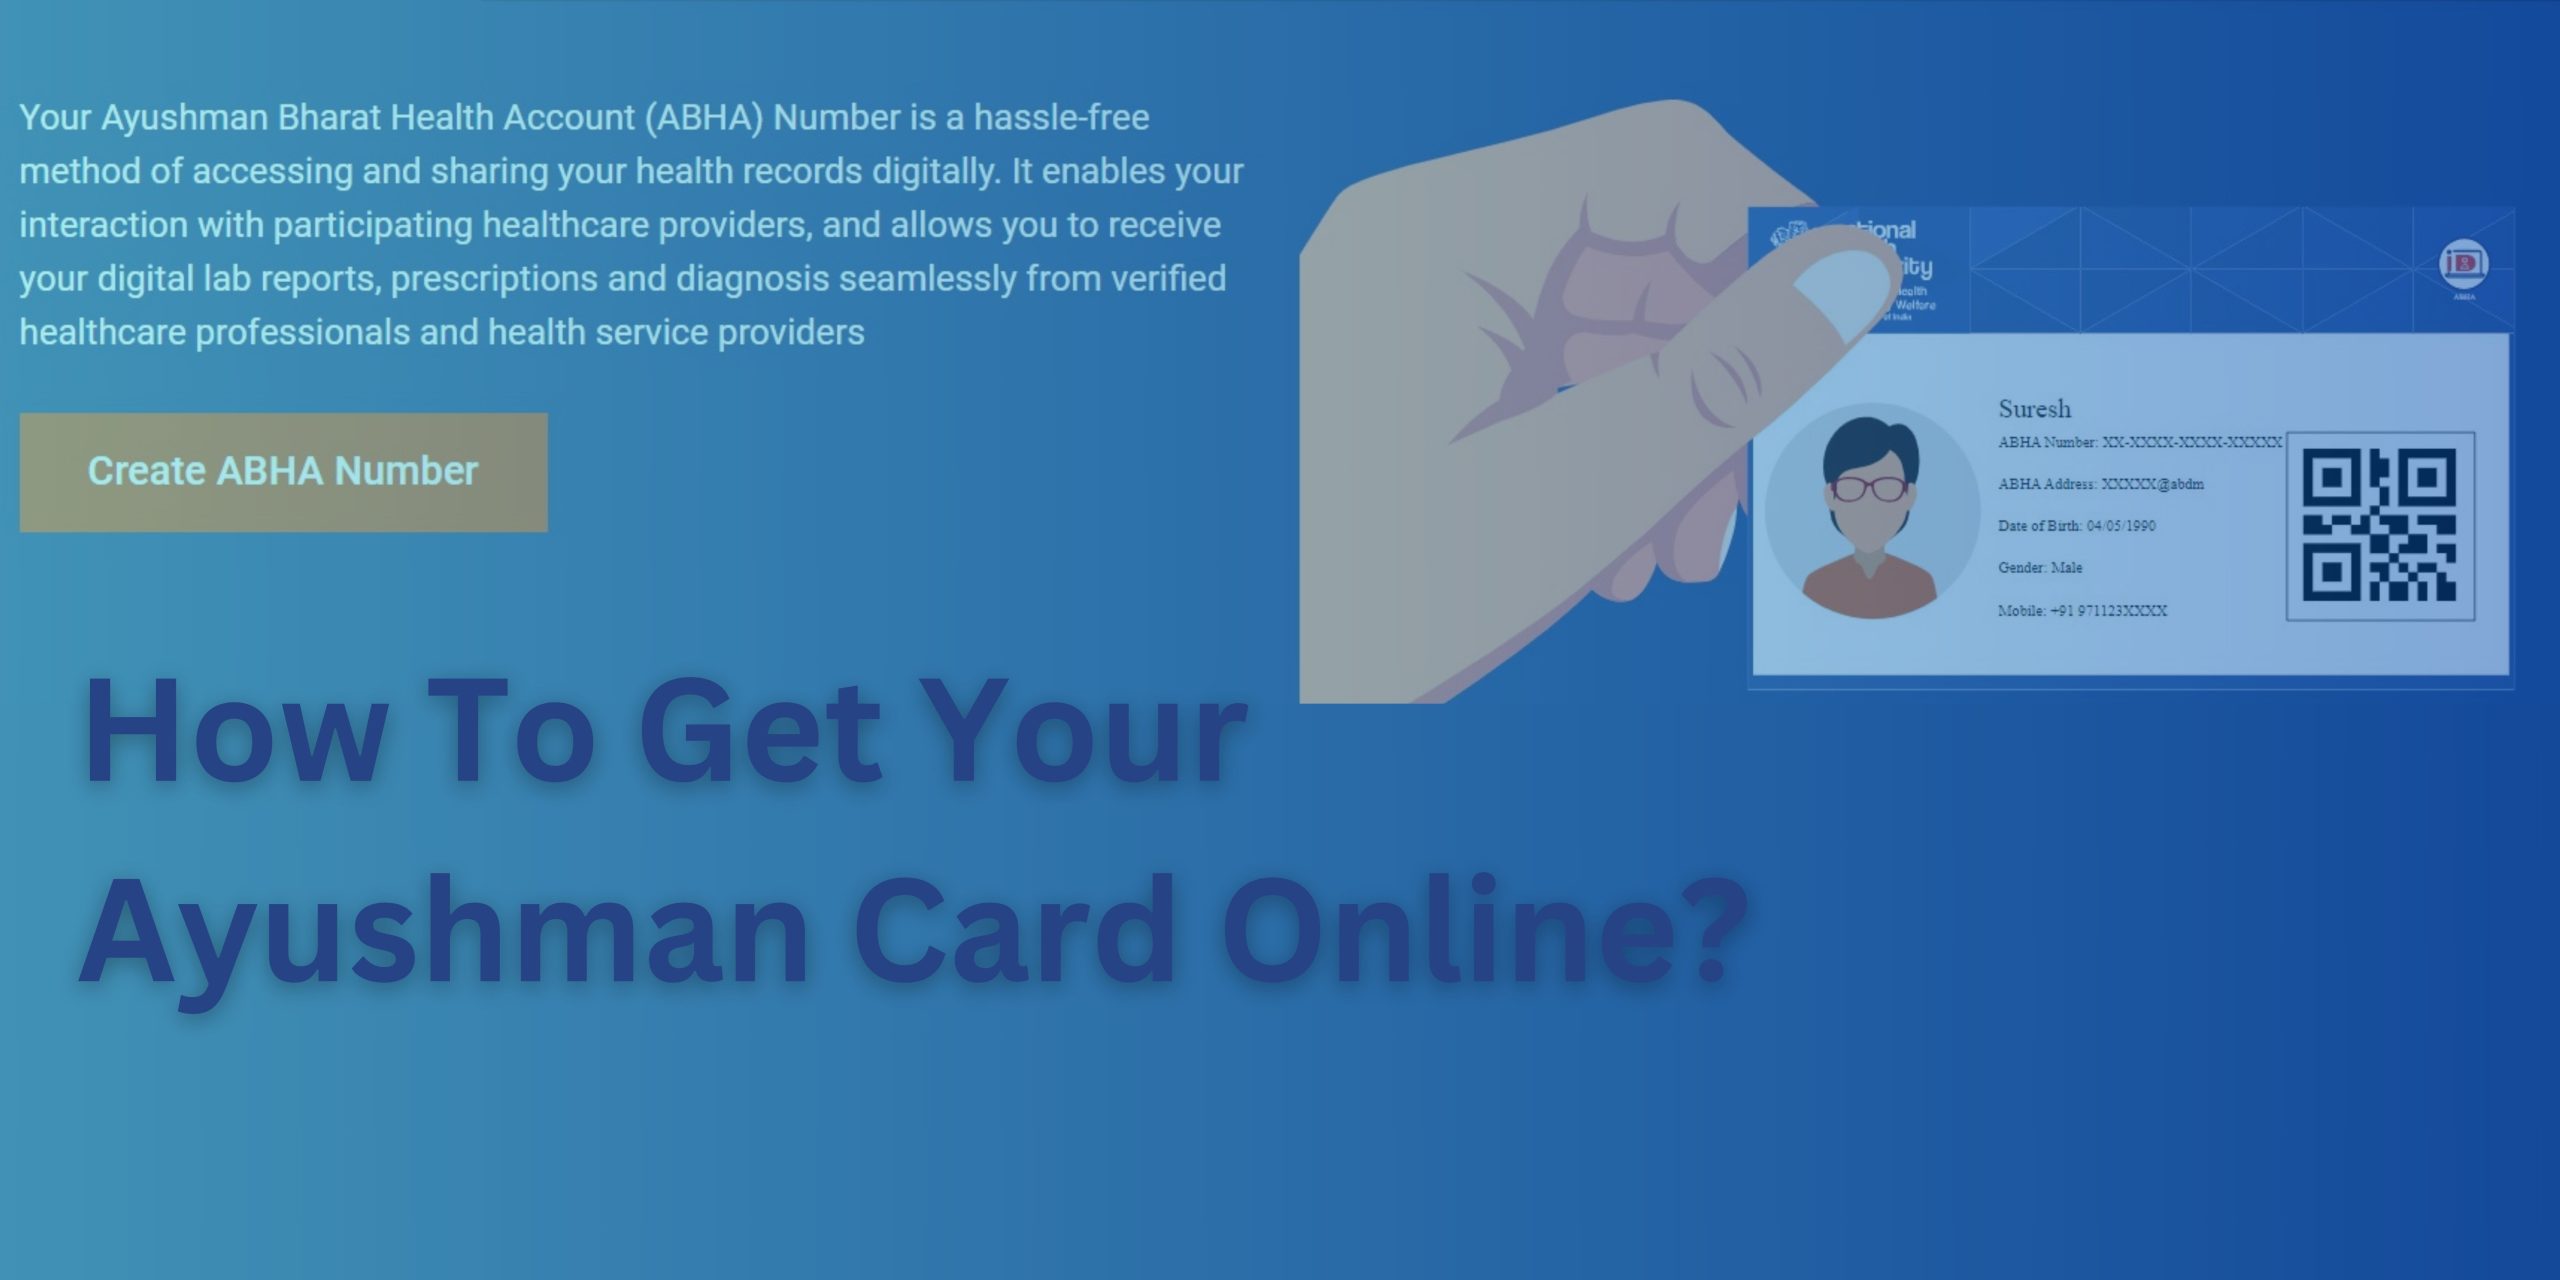 How to Apply for an Ayushman card online at home